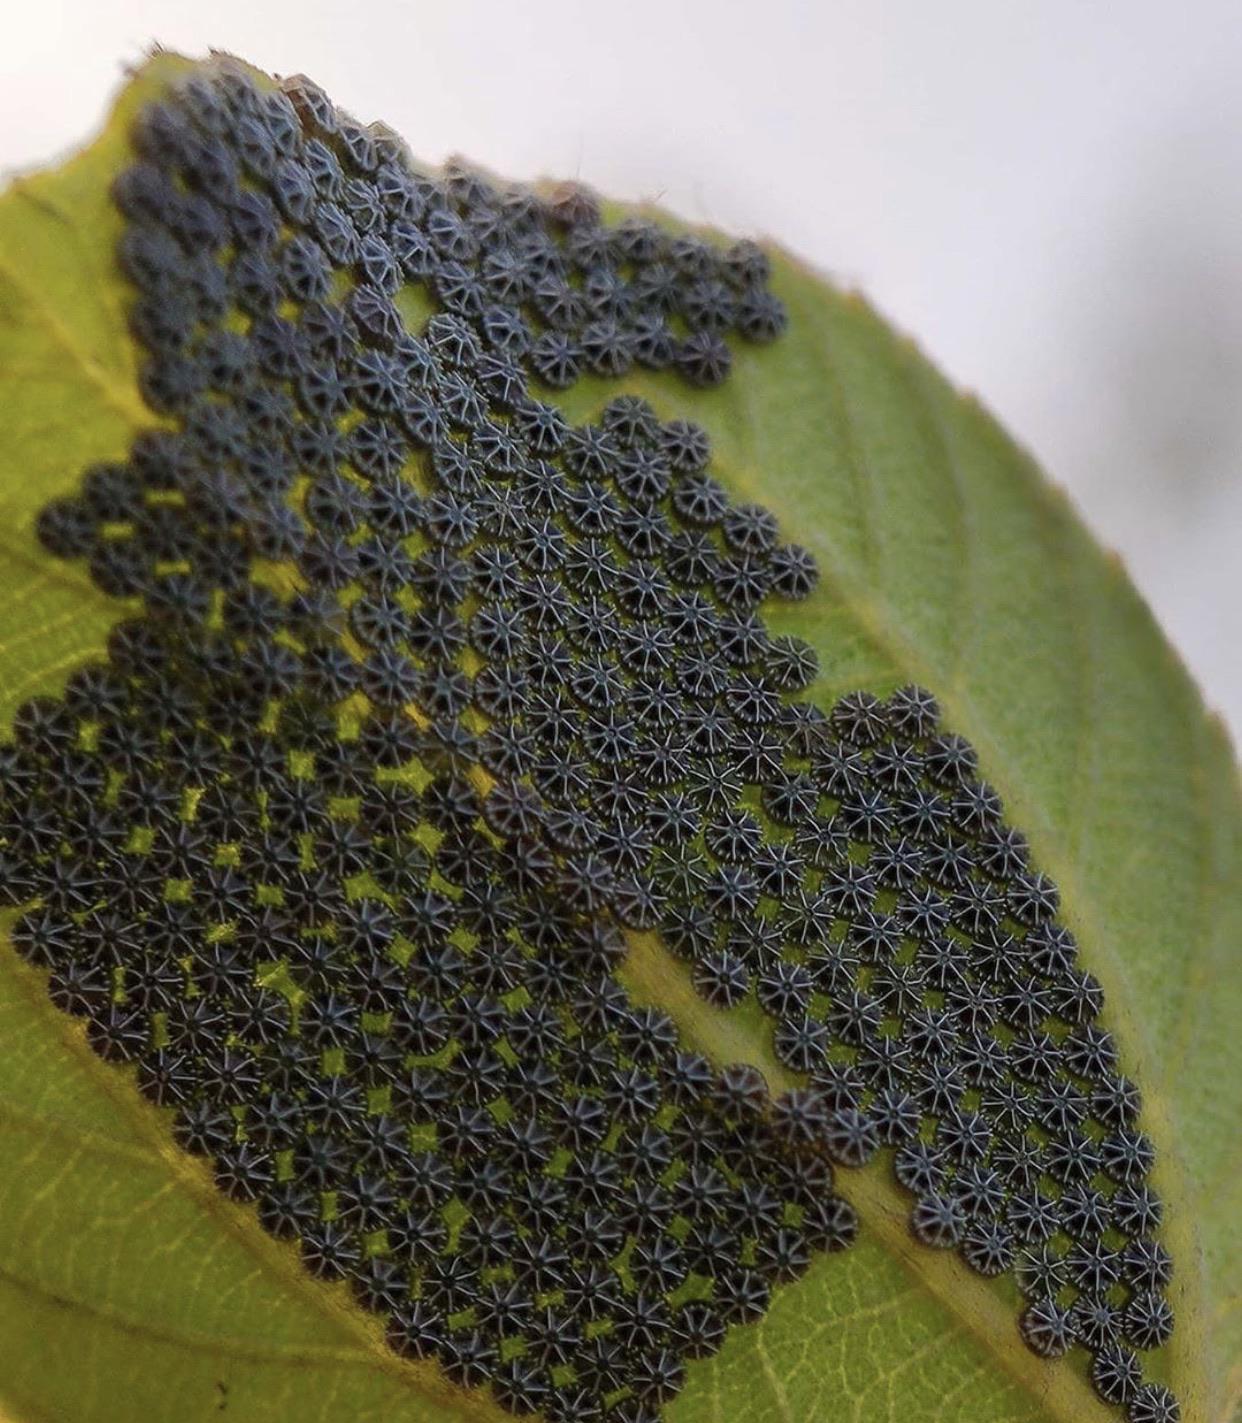 Butterfly eggs prove aliens exist.